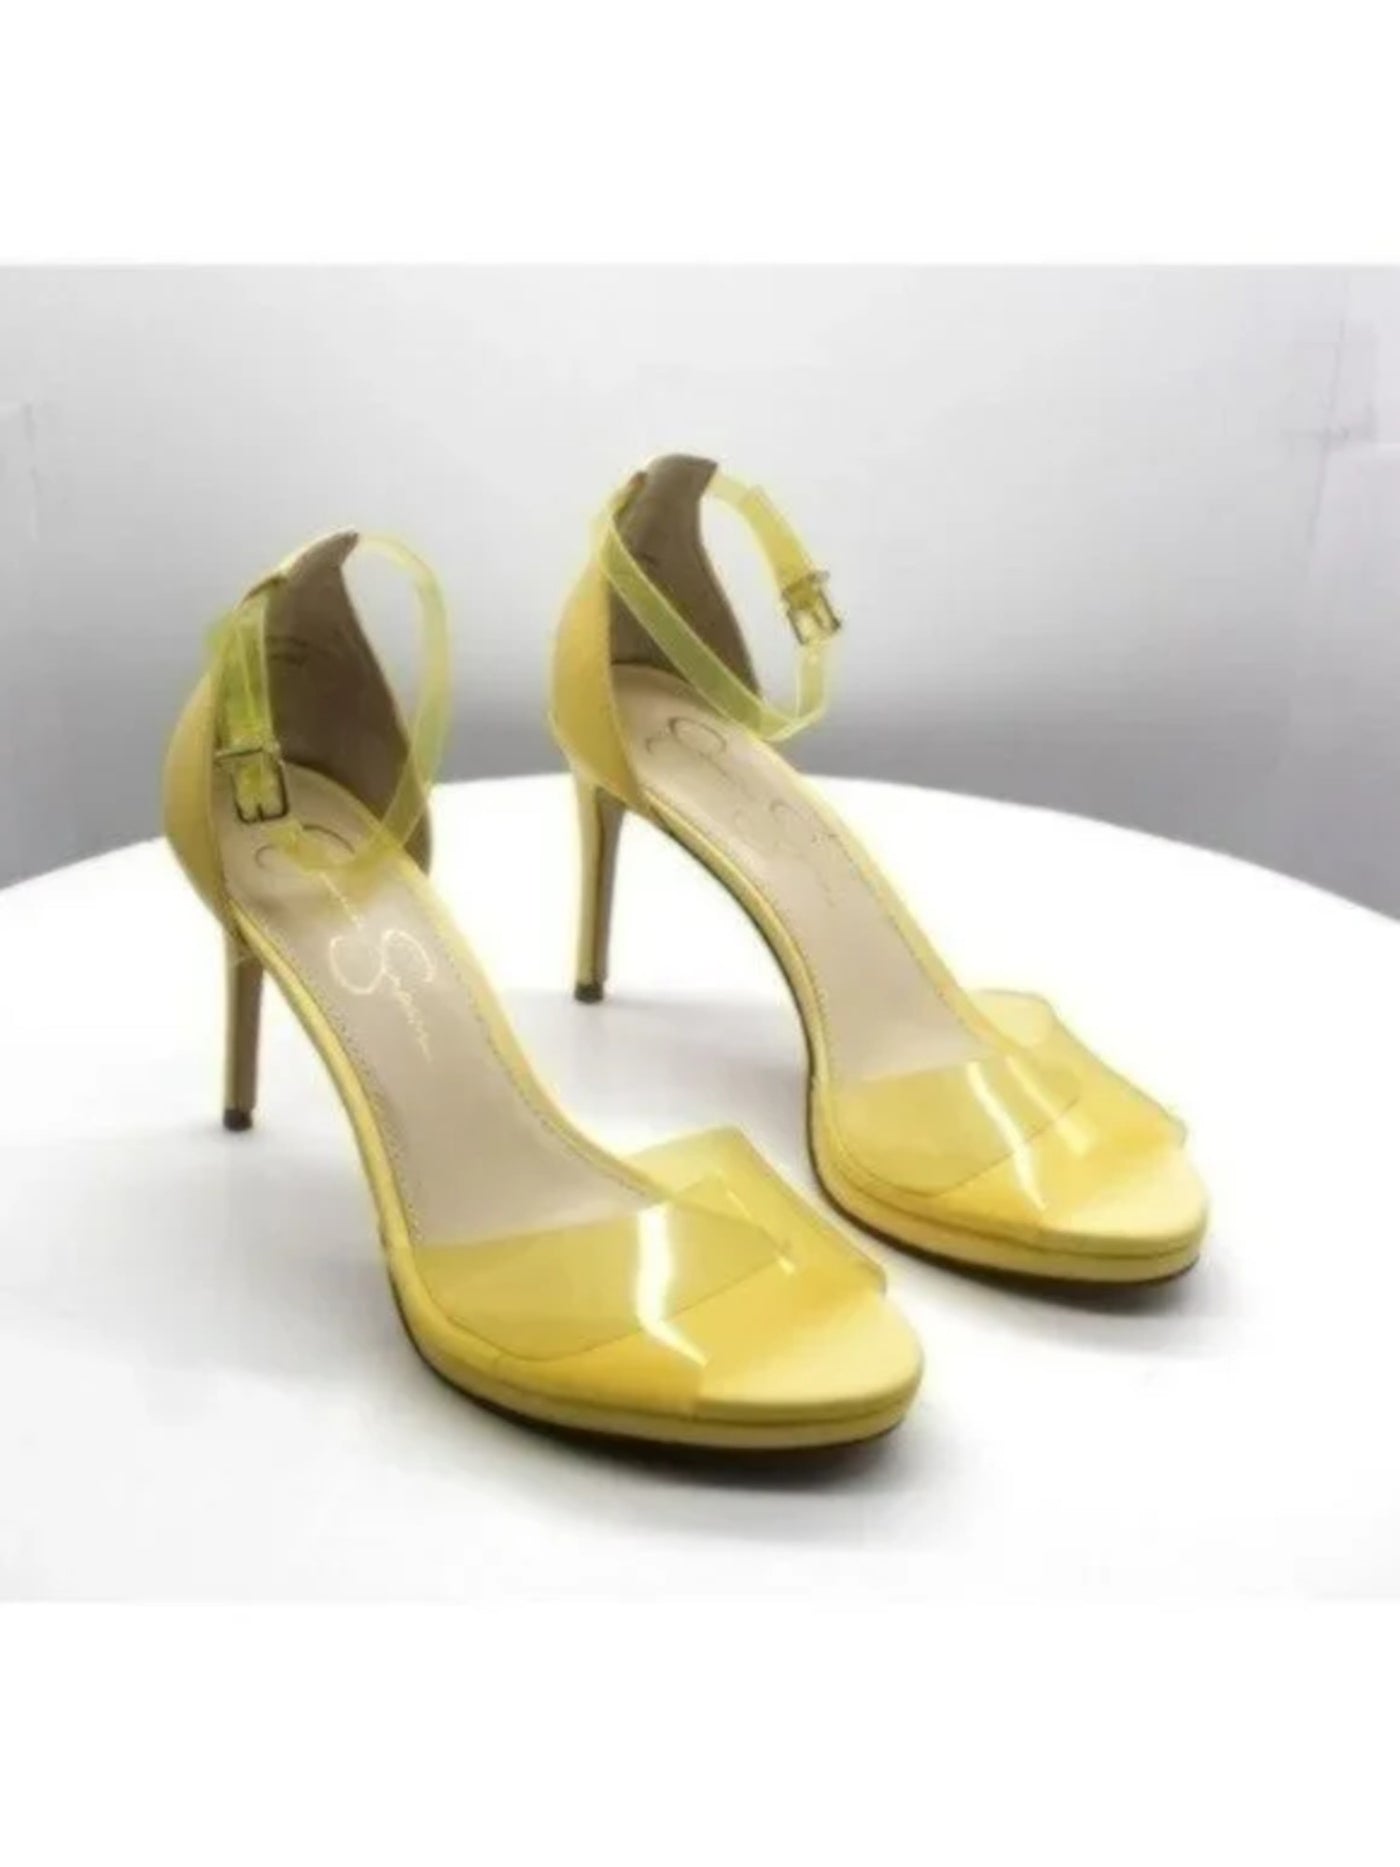 JESSICA SIMPSON Womens Yellow Translucent Ankle Strap Padded Daisile Round Toe Stiletto Buckle Heeled Sandal 5.5 M